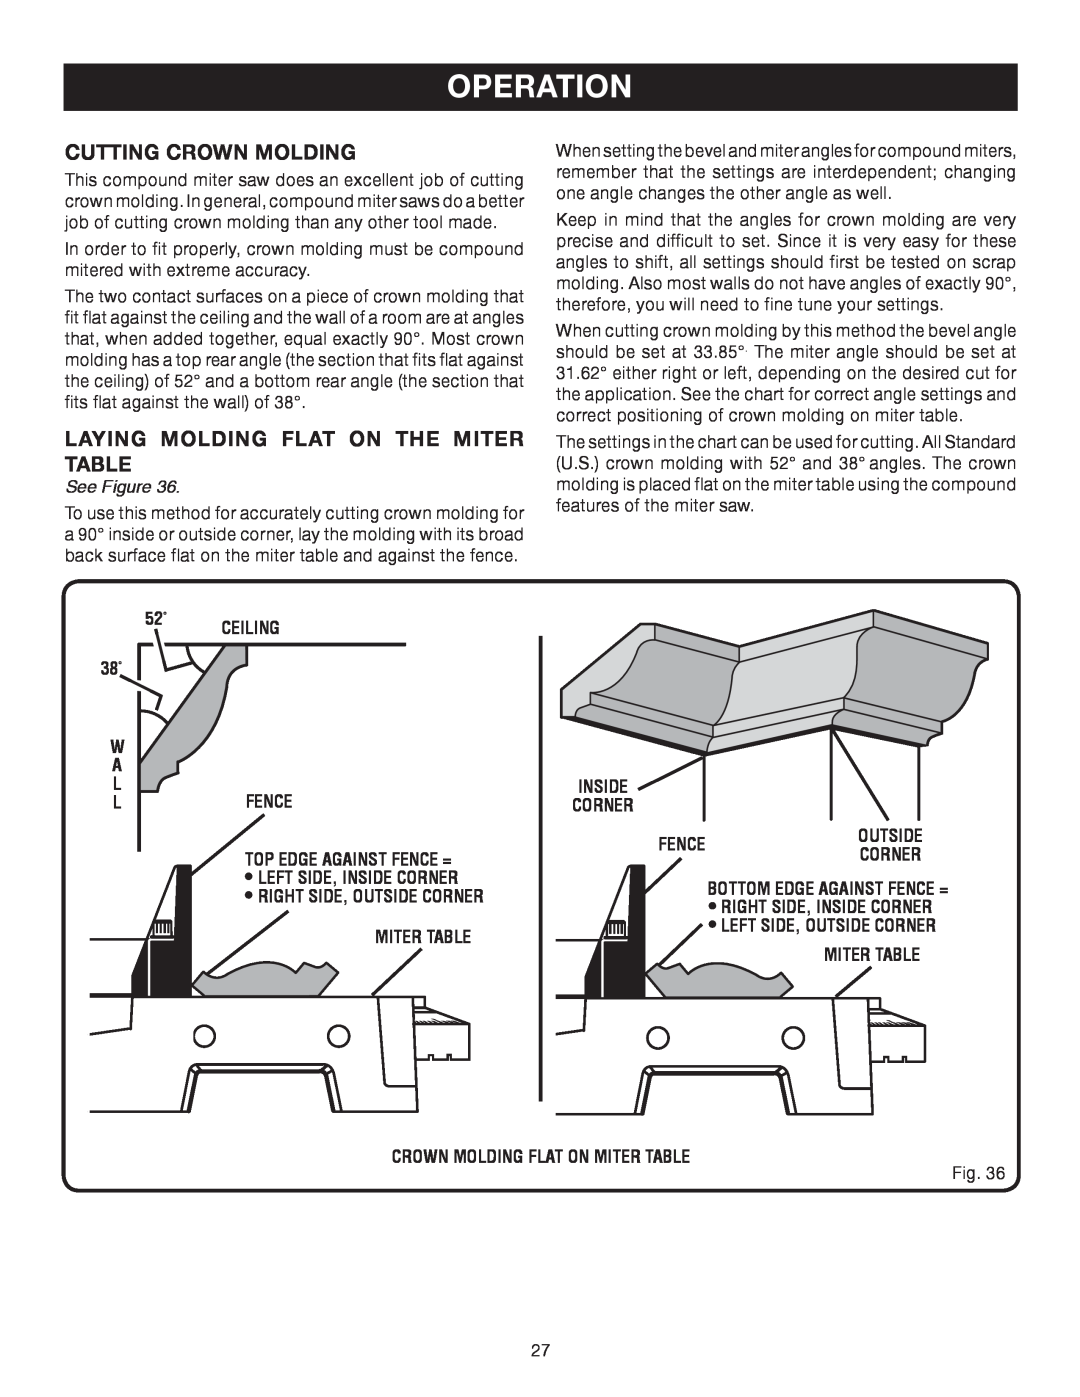 Ryobi TS1141 manual Operation, cutting crown molding, Laying molding flat on the miter table, See Figure 